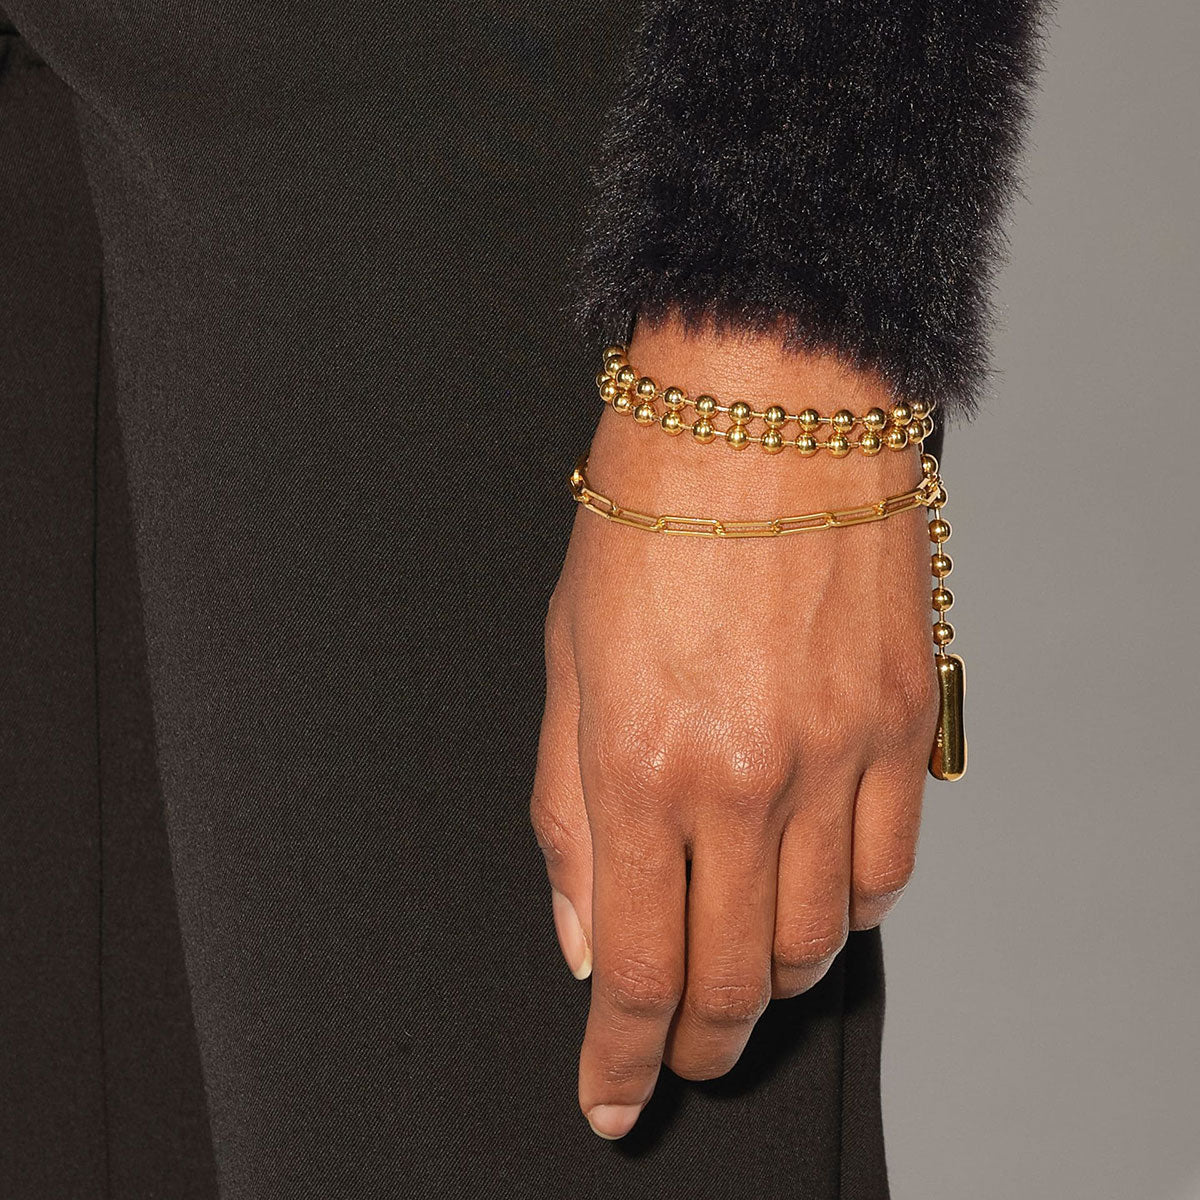 TRIPLE BALL CHAIN BRACELET - Why are you here?